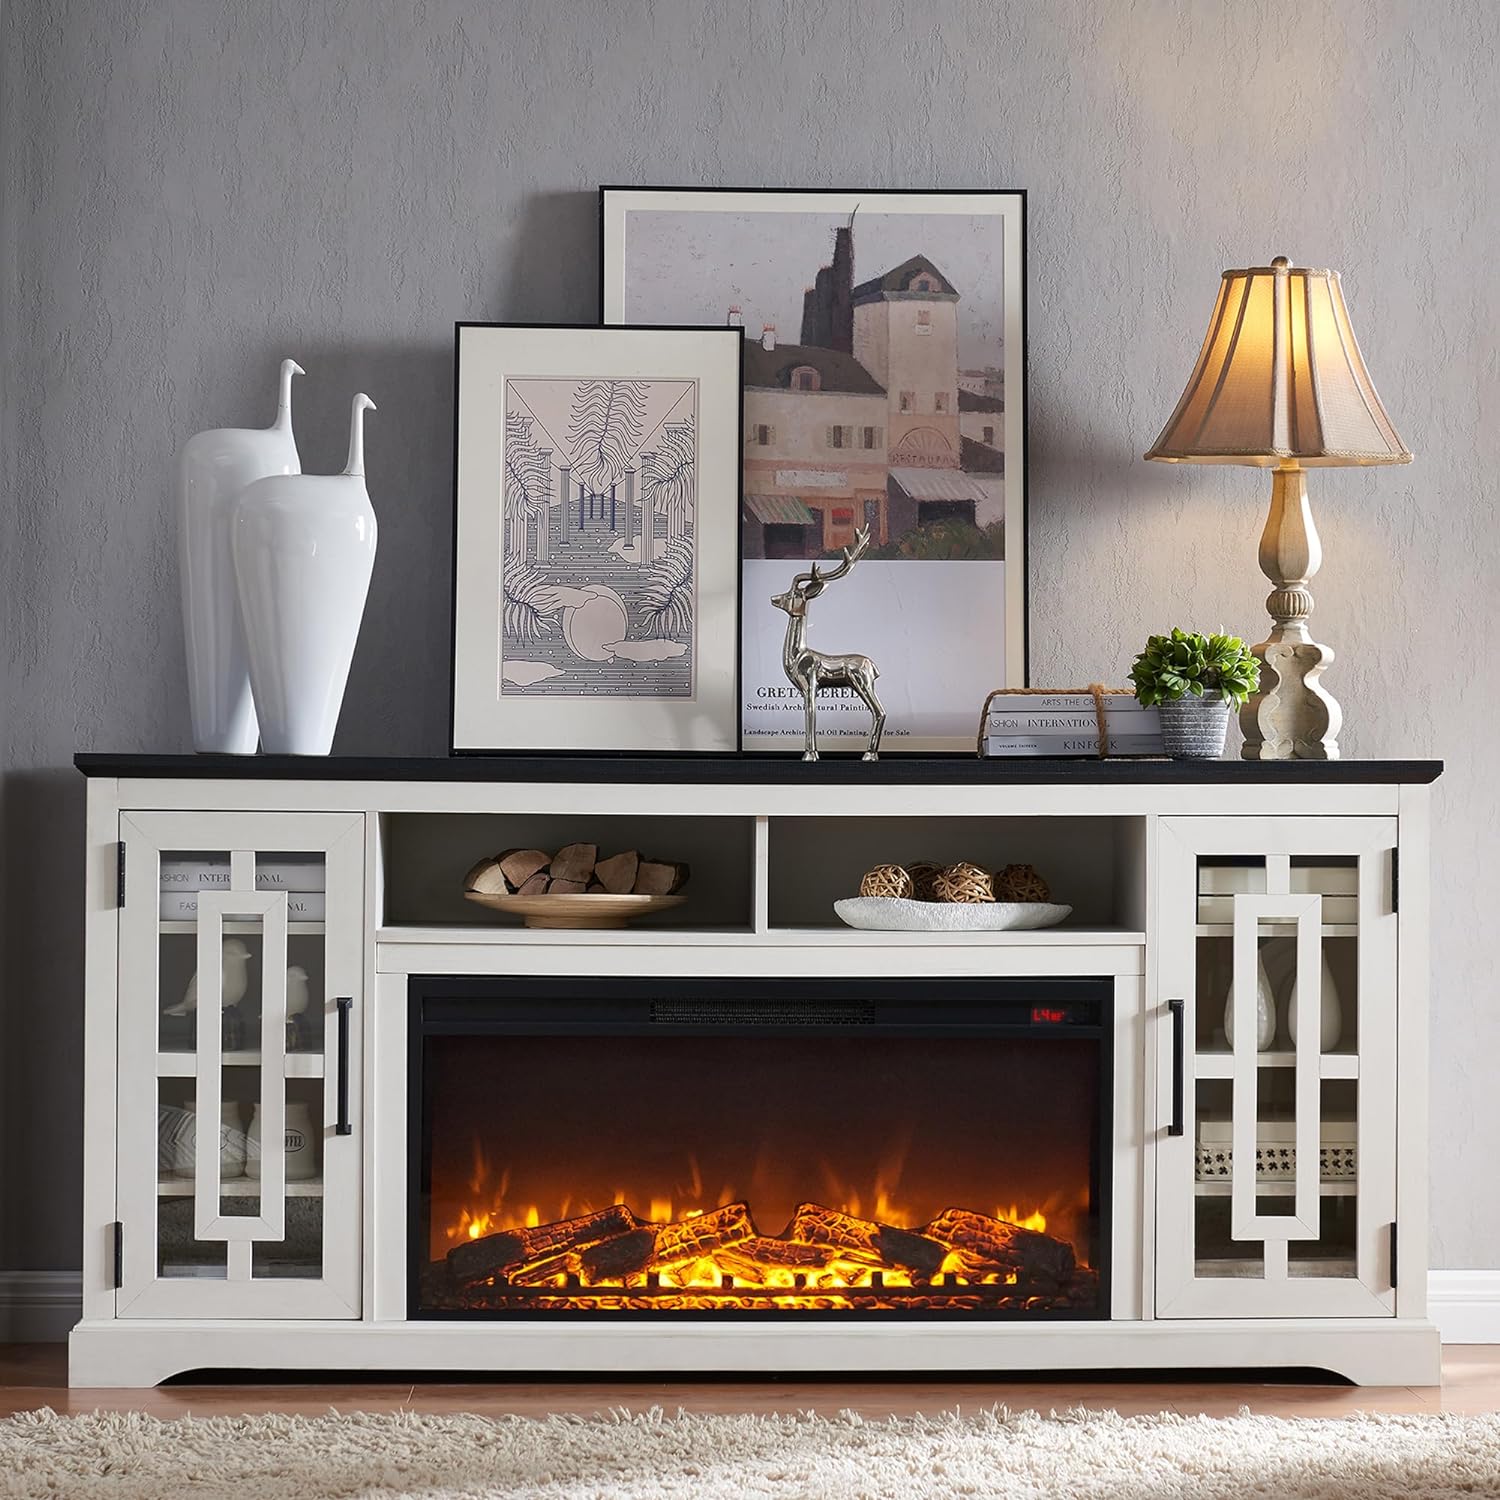 JXQTLINGMU Farmhouse Fireplace TV Stand with 36 Electric Fireplace for 80 Inch TV, 32 Tall Entertainment Center, Modern Media Console, 6 Shelves Storage Cabinet for Living Room, Distressed White